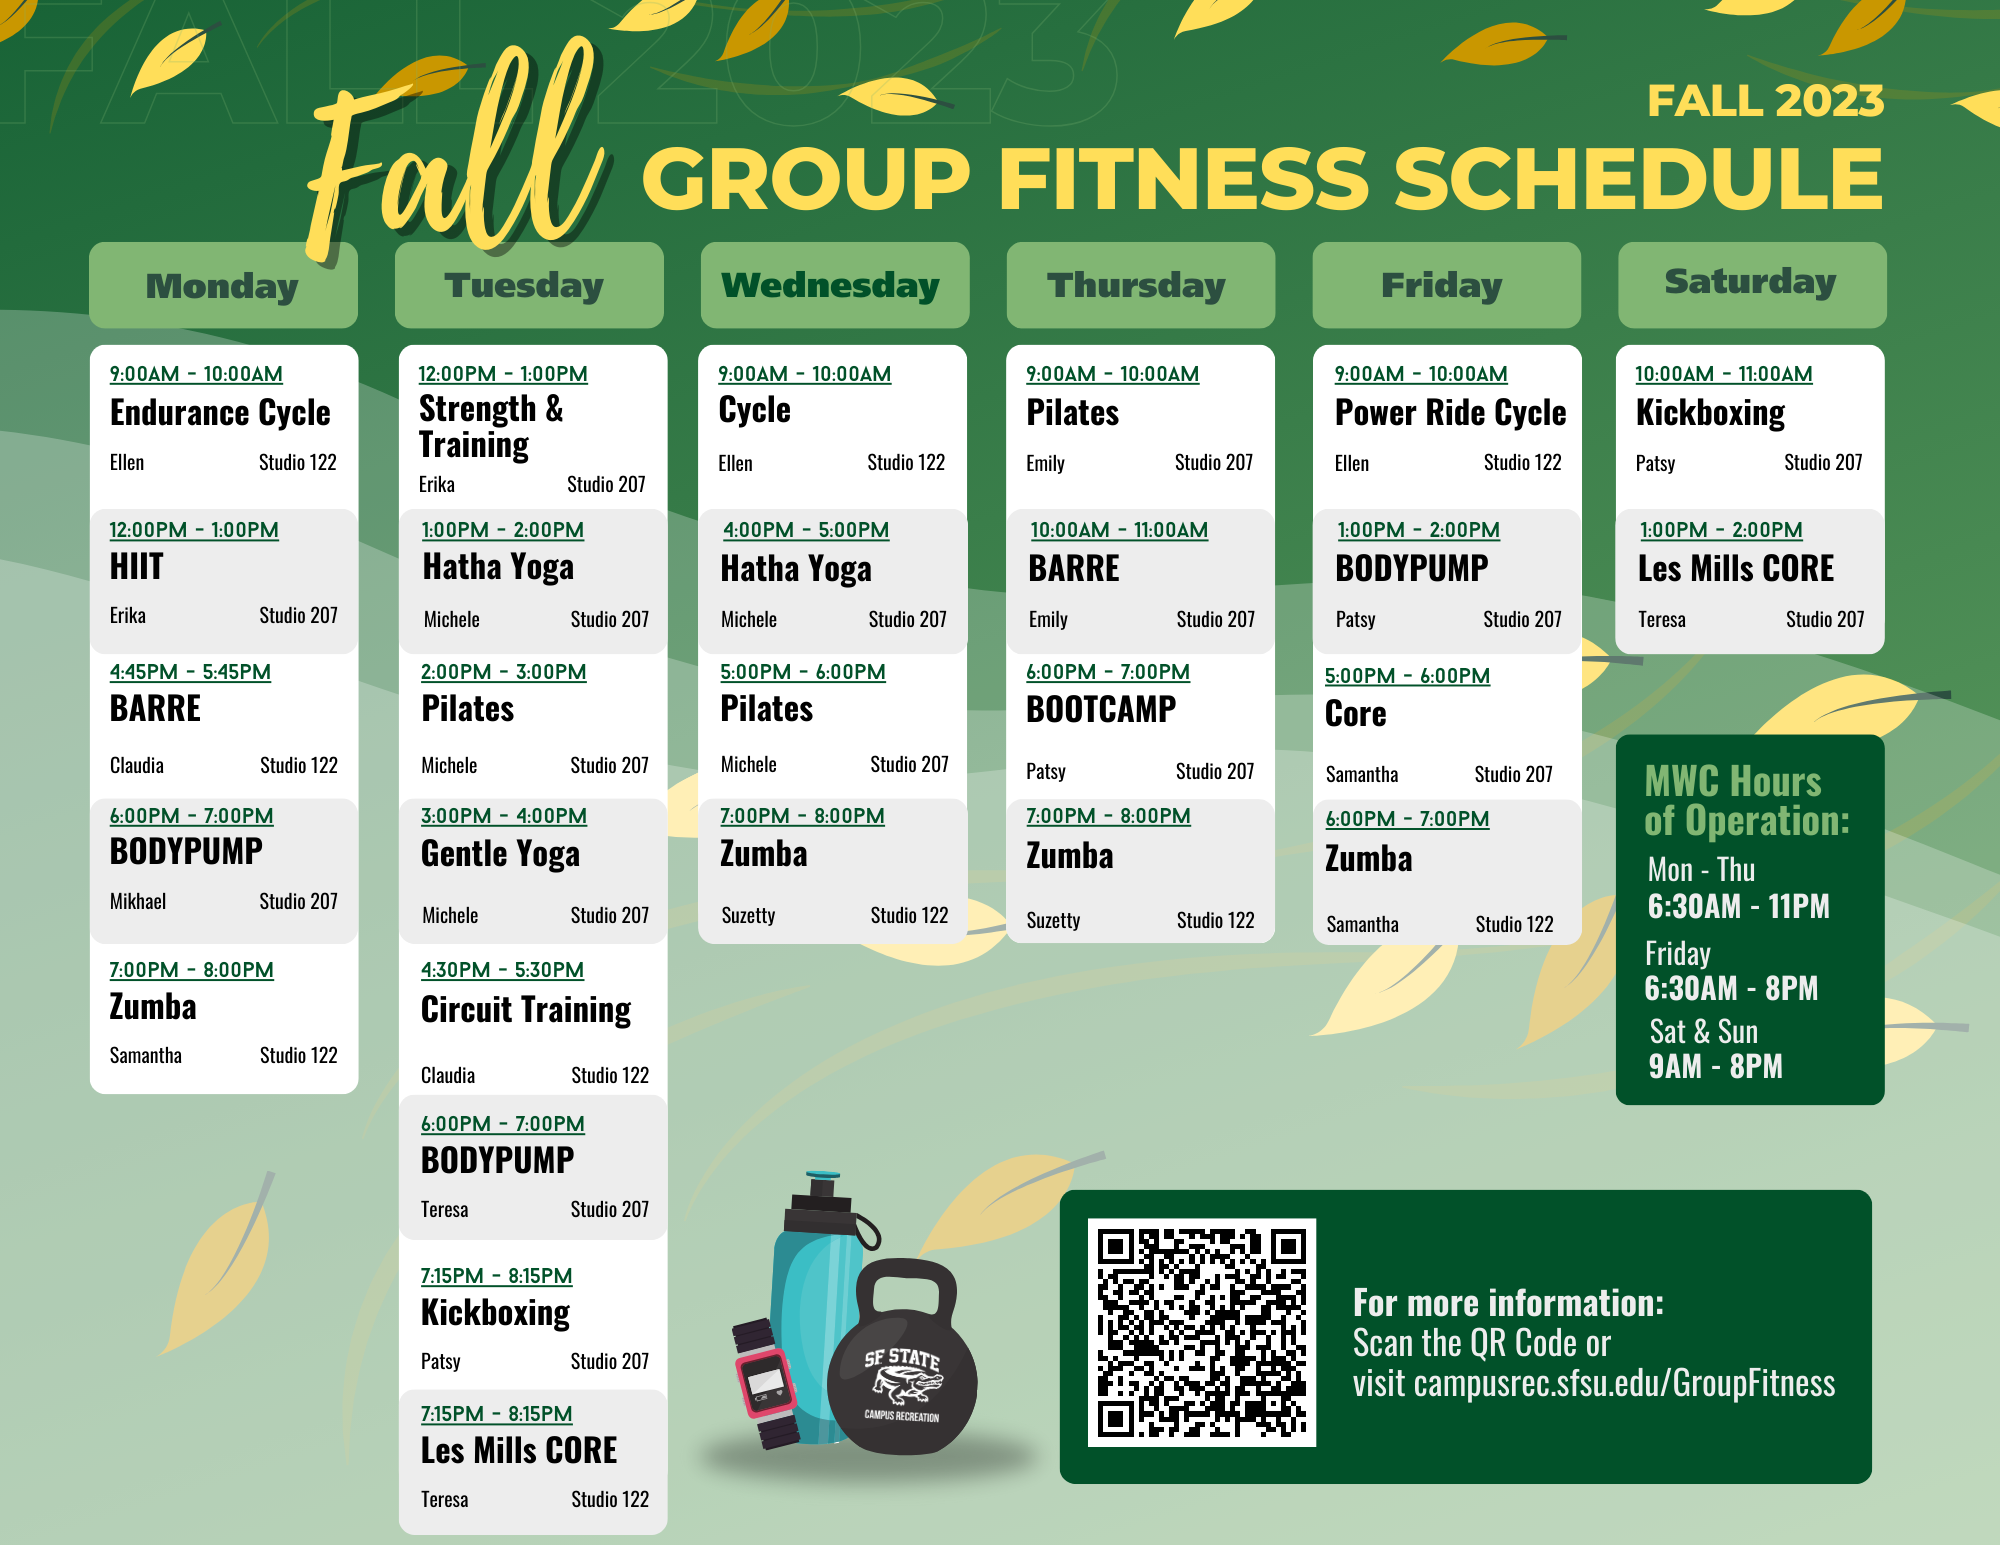 Fall 2023 Group Fitness Schedule